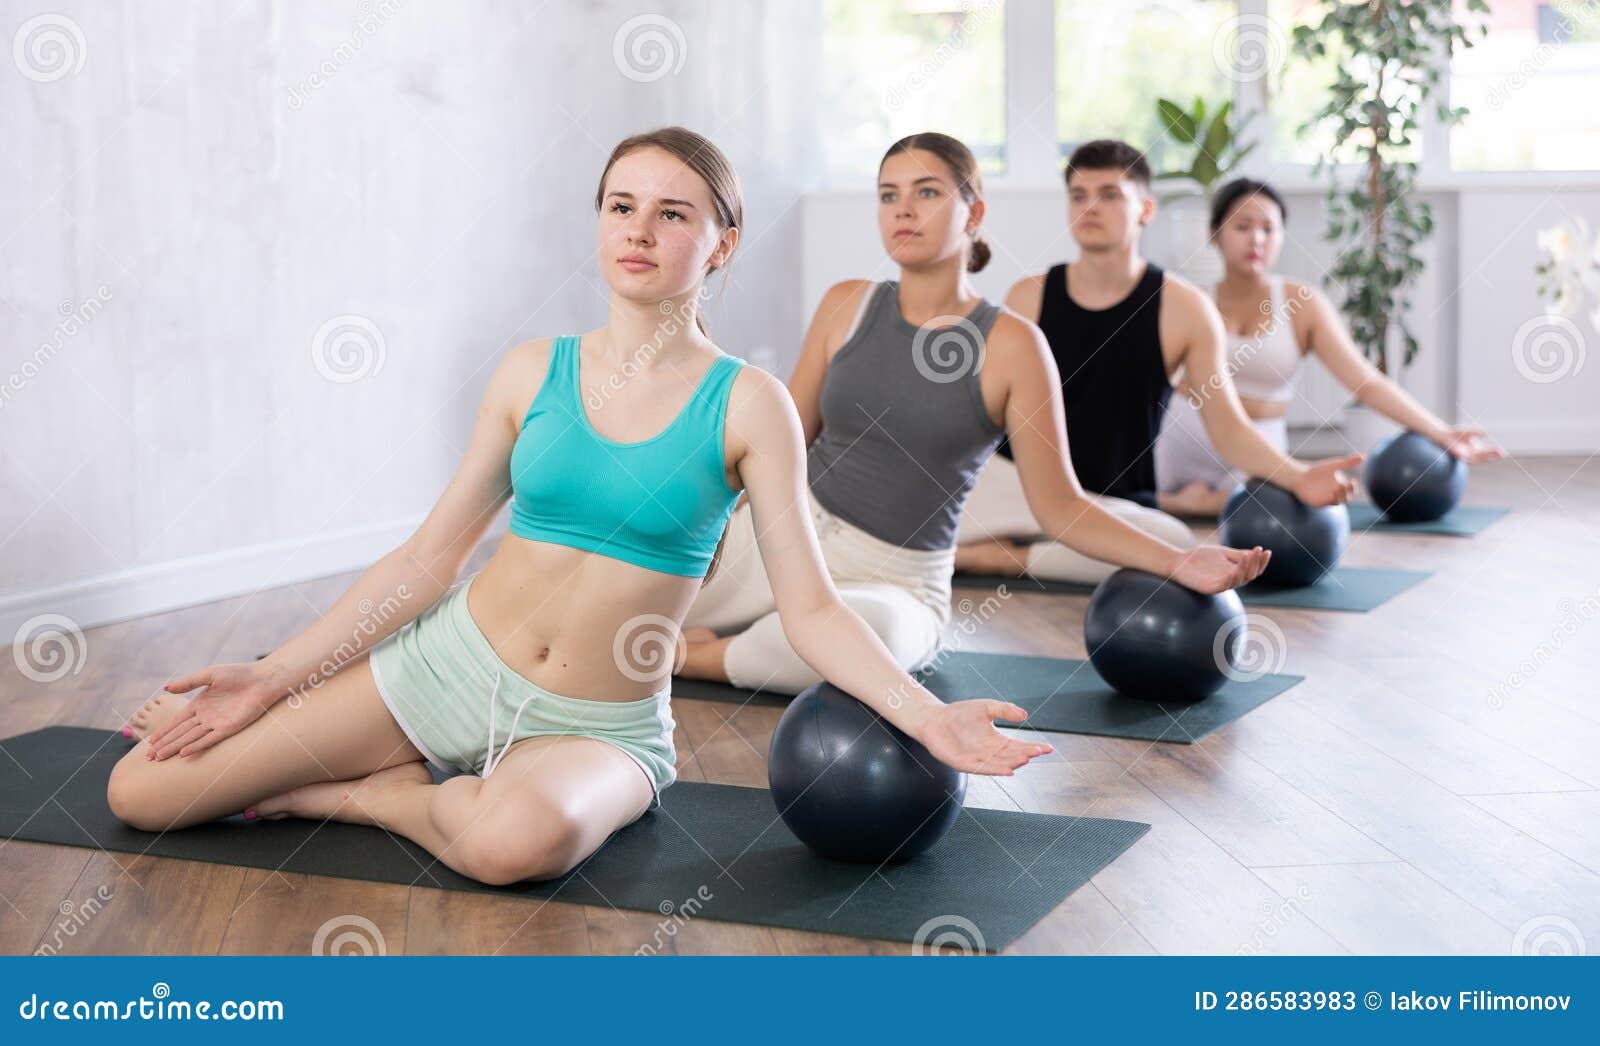 Young Girl Practicing Pilates Pose with Softball between Legs in Training  Area Stock Photo - Image of room, light: 305701190